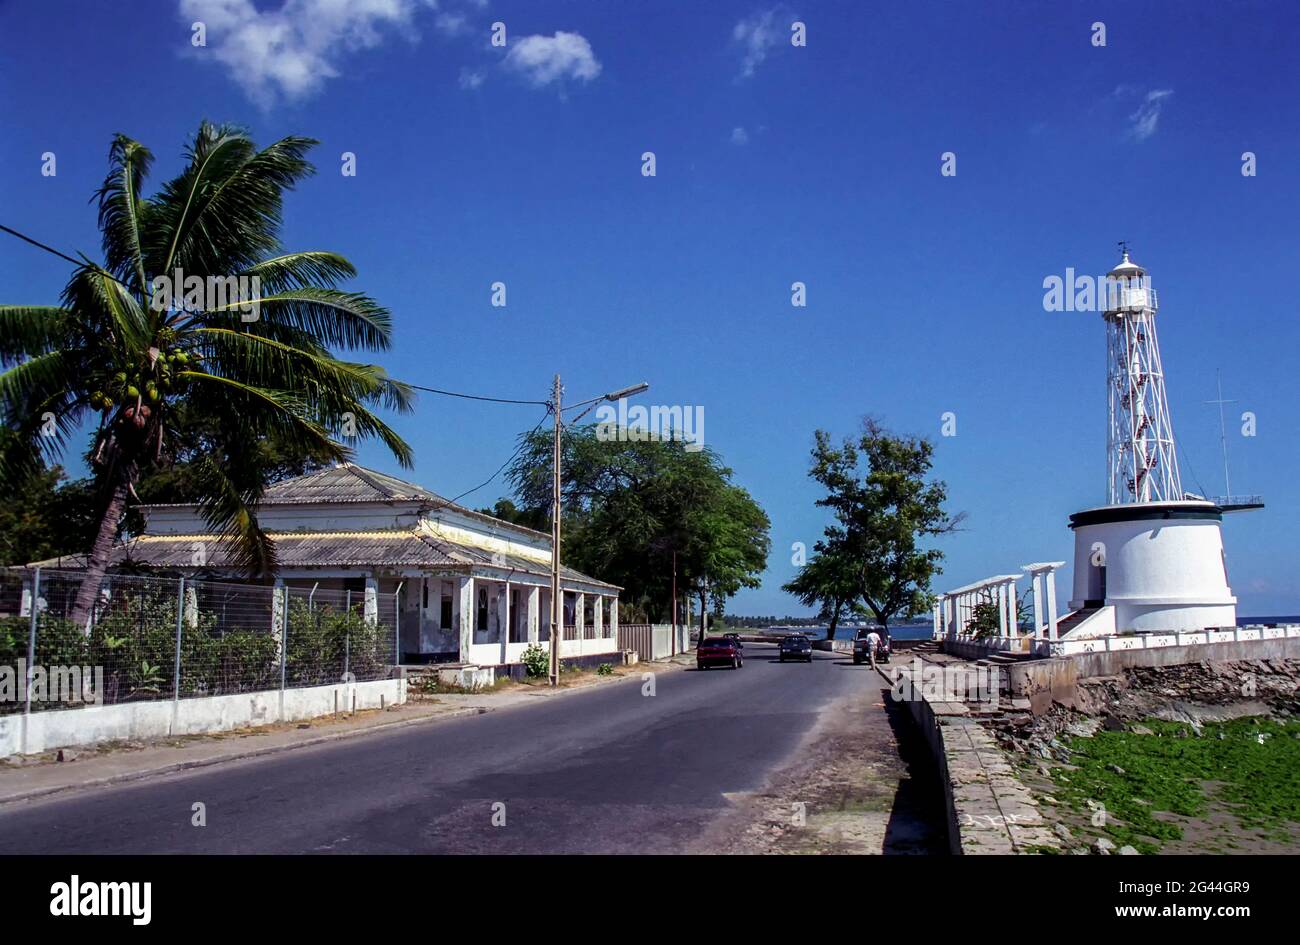 May 20, 2002-Dili, Timor-Leste-In This Photos taken Independence day scene and Timorese daily life on 7day in Dili and Atambua Village. A View of Japanese Embassy near Dili bay in Timor-Leste. Stock Photo